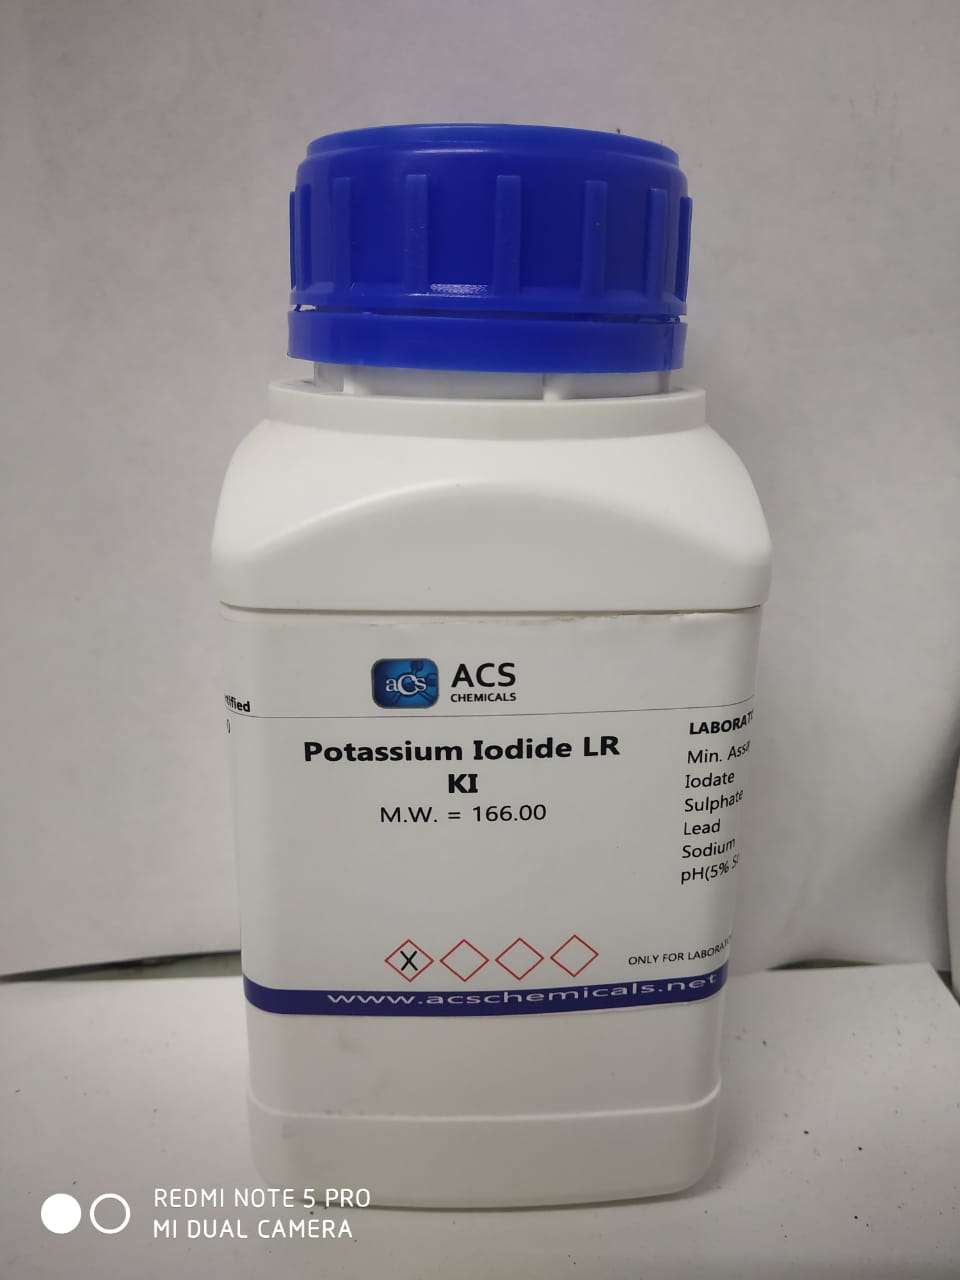 Potassium Iodide Laboratory reagents and Analytical reagents